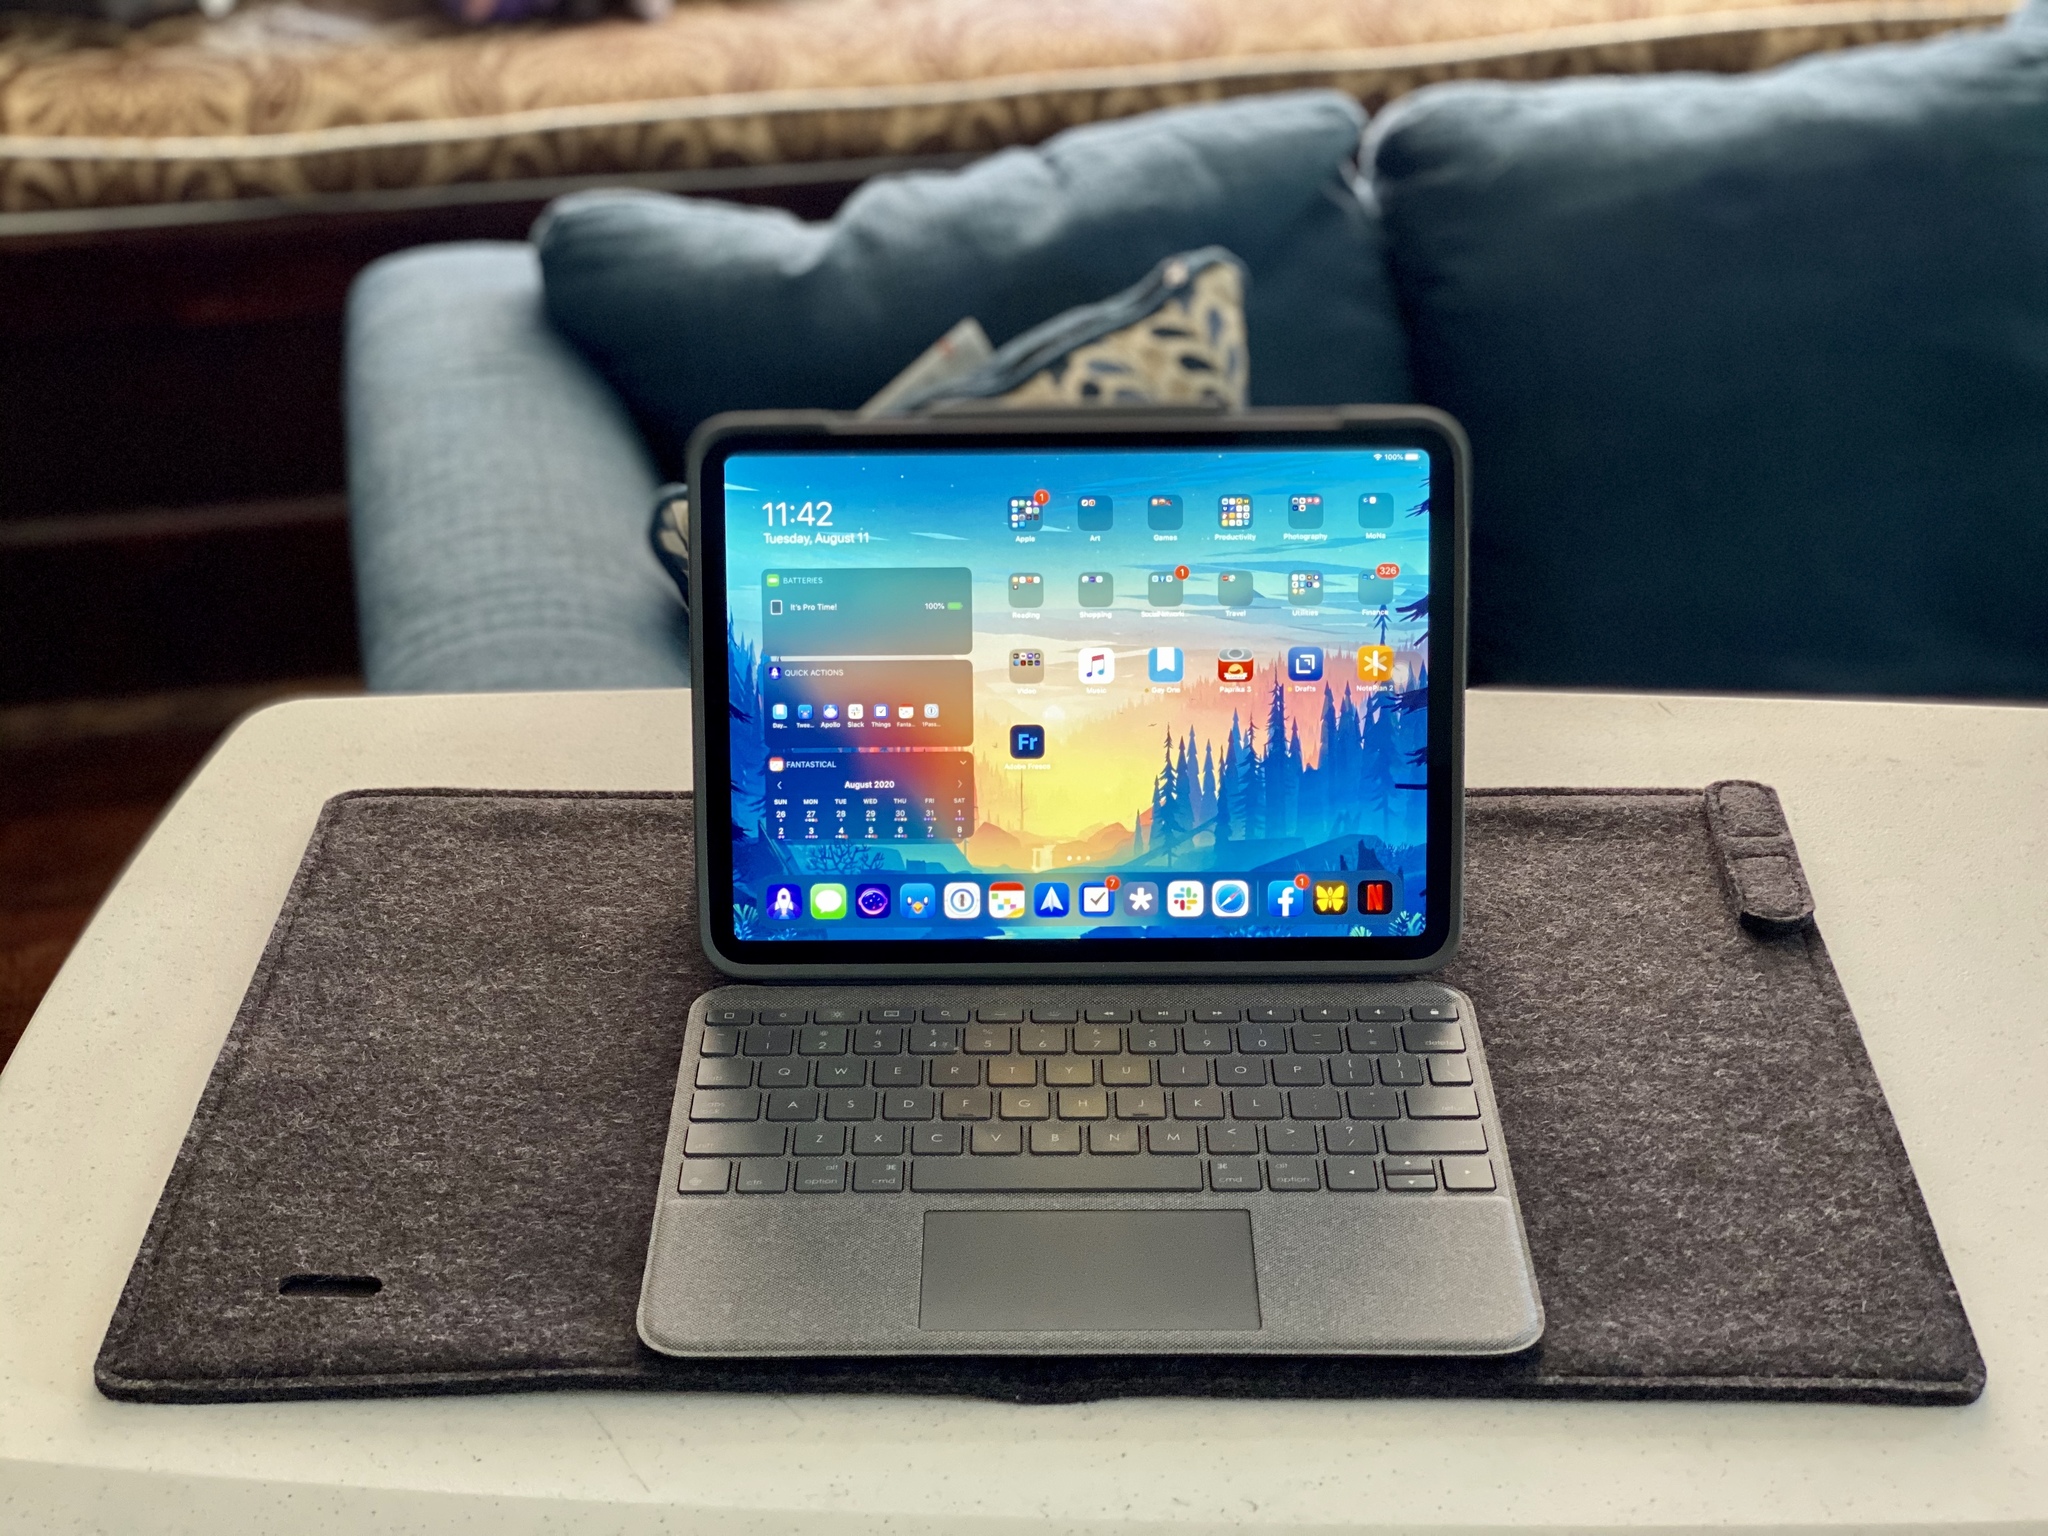 Magic Sleeve for iPad Pro review: A clever sleeve and desk mat in one